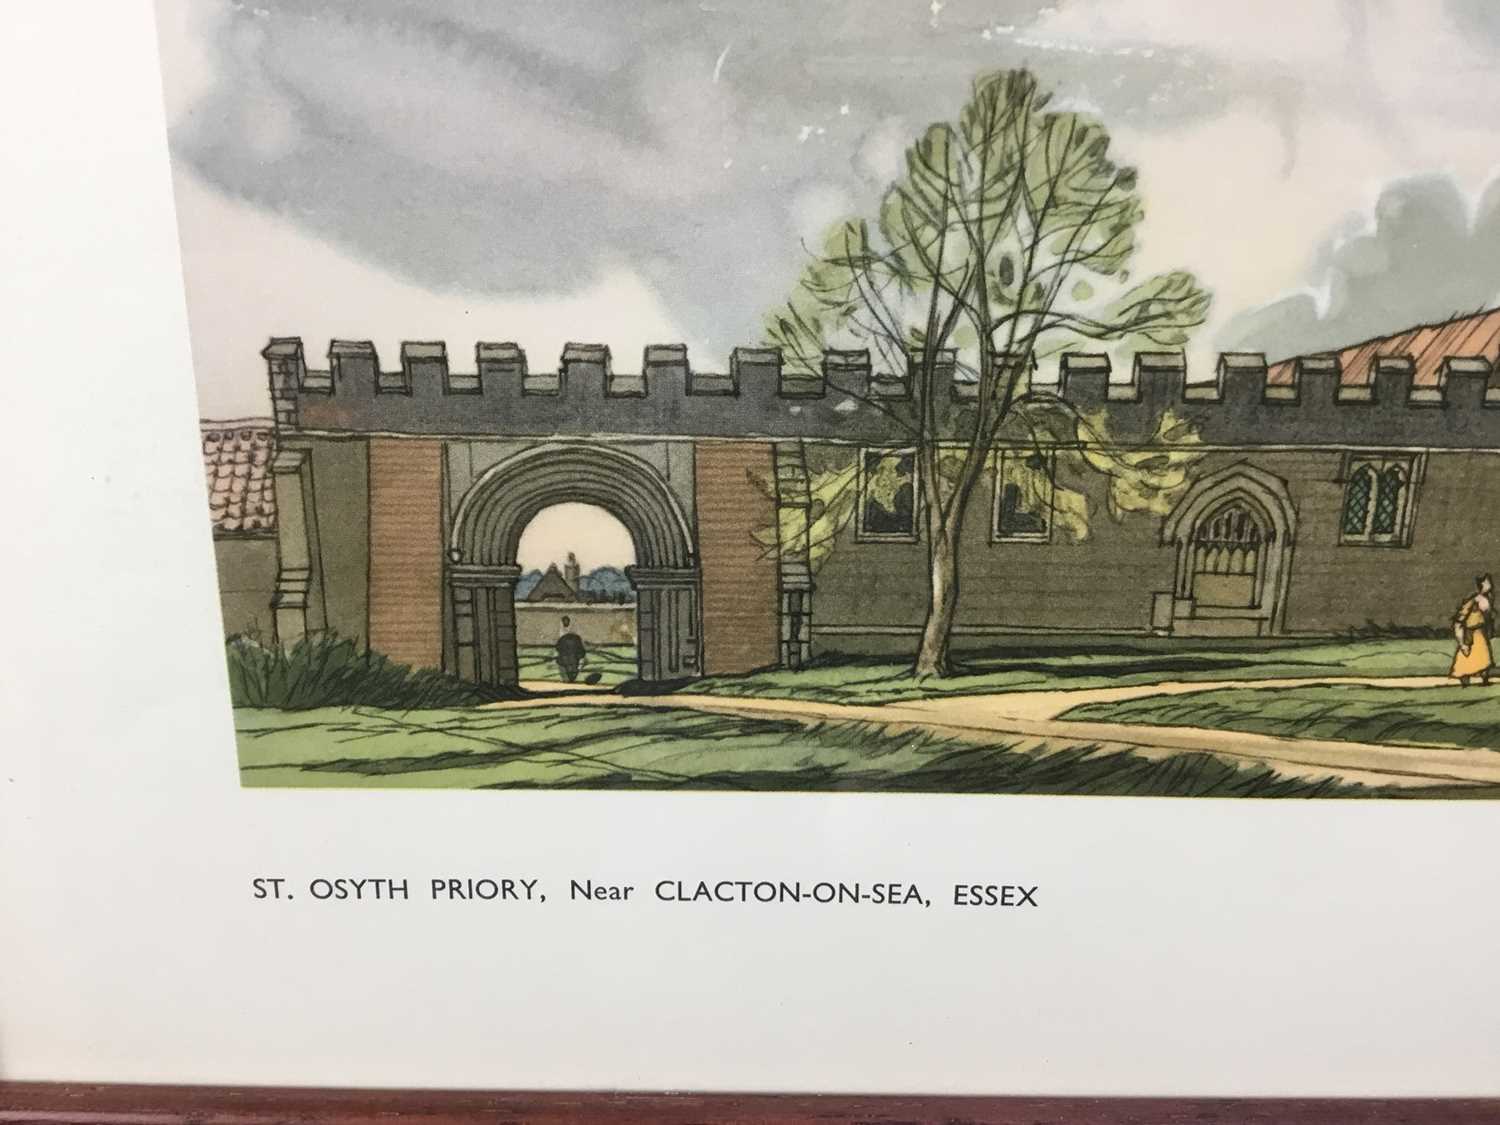 Original Railway Carriage Print/ Poster: "ST OSYTH PRIORY, NEAR CLACTON, ESSEX”. Artwork by Fred W B - Image 5 of 6